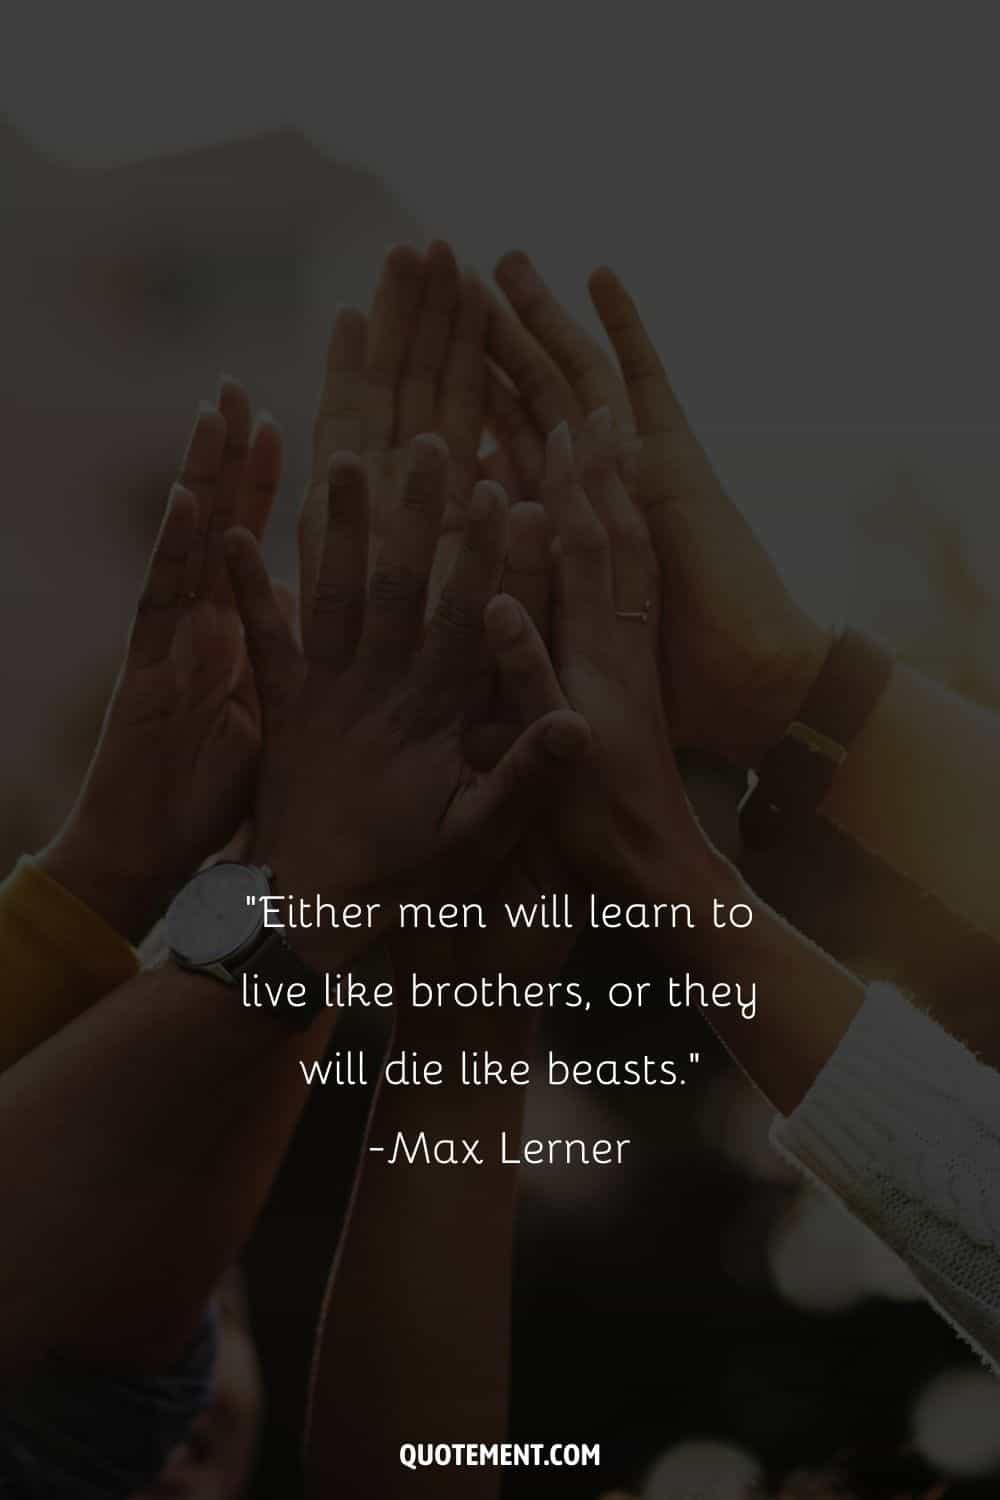 “Either men will learn to live like brothers, or they will die like beasts.” — Max Lerner